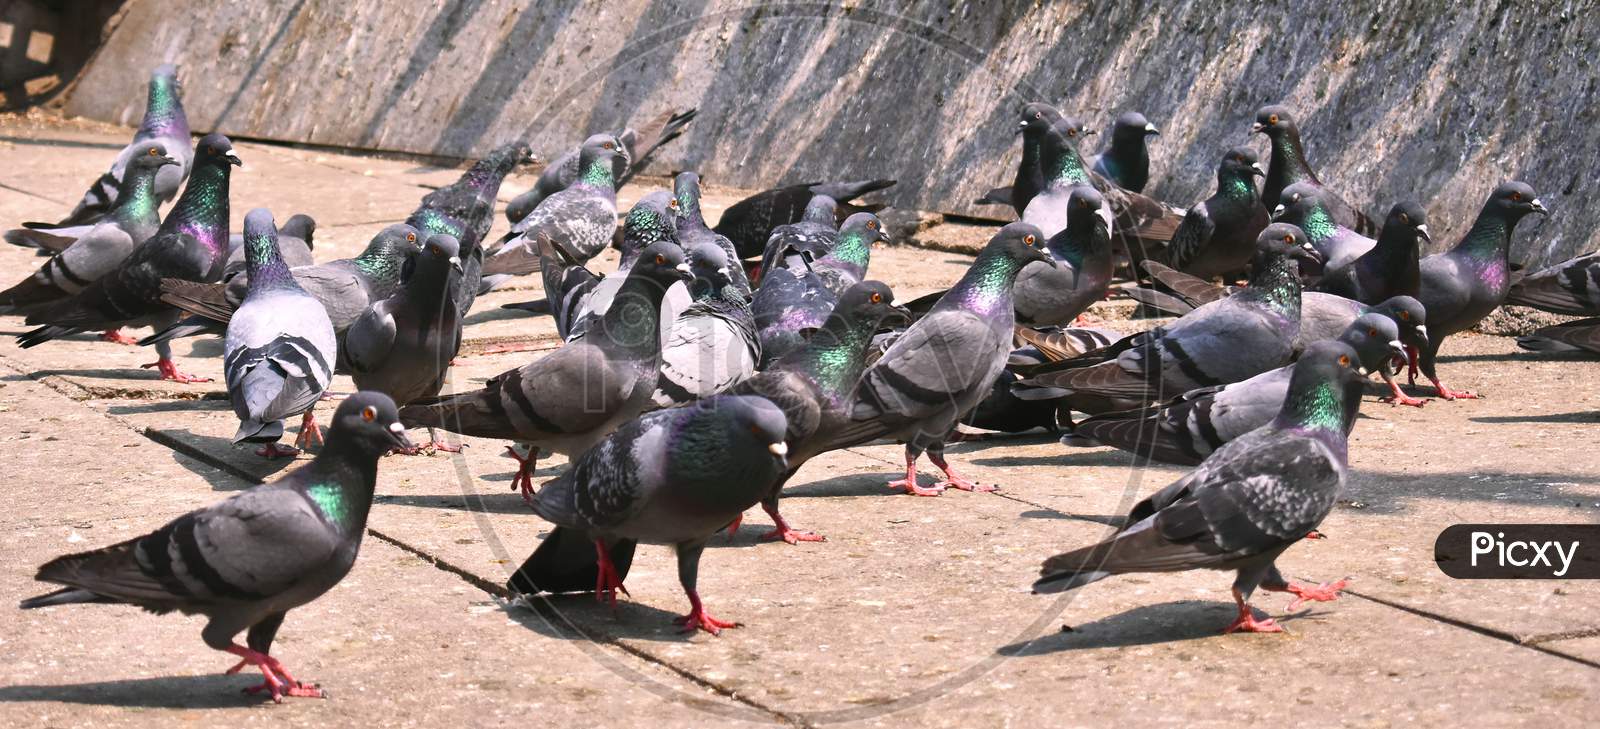 A Group Of Pigeon Sitting On The Ground